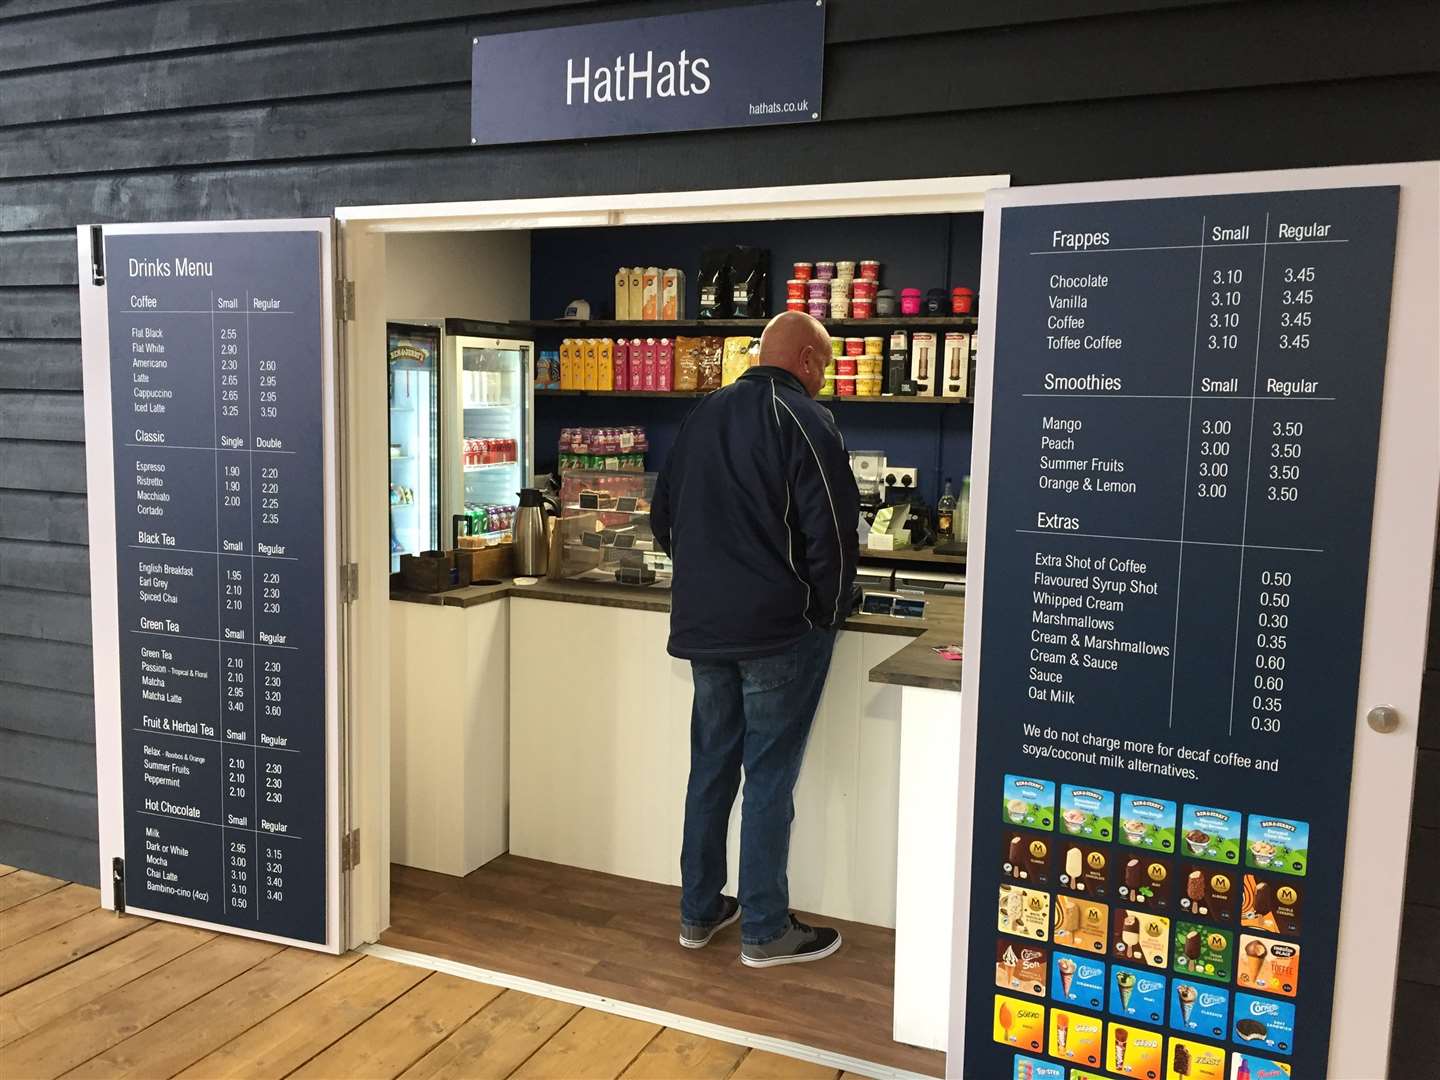 HatHats serves hot drinks in the South Quay Shed